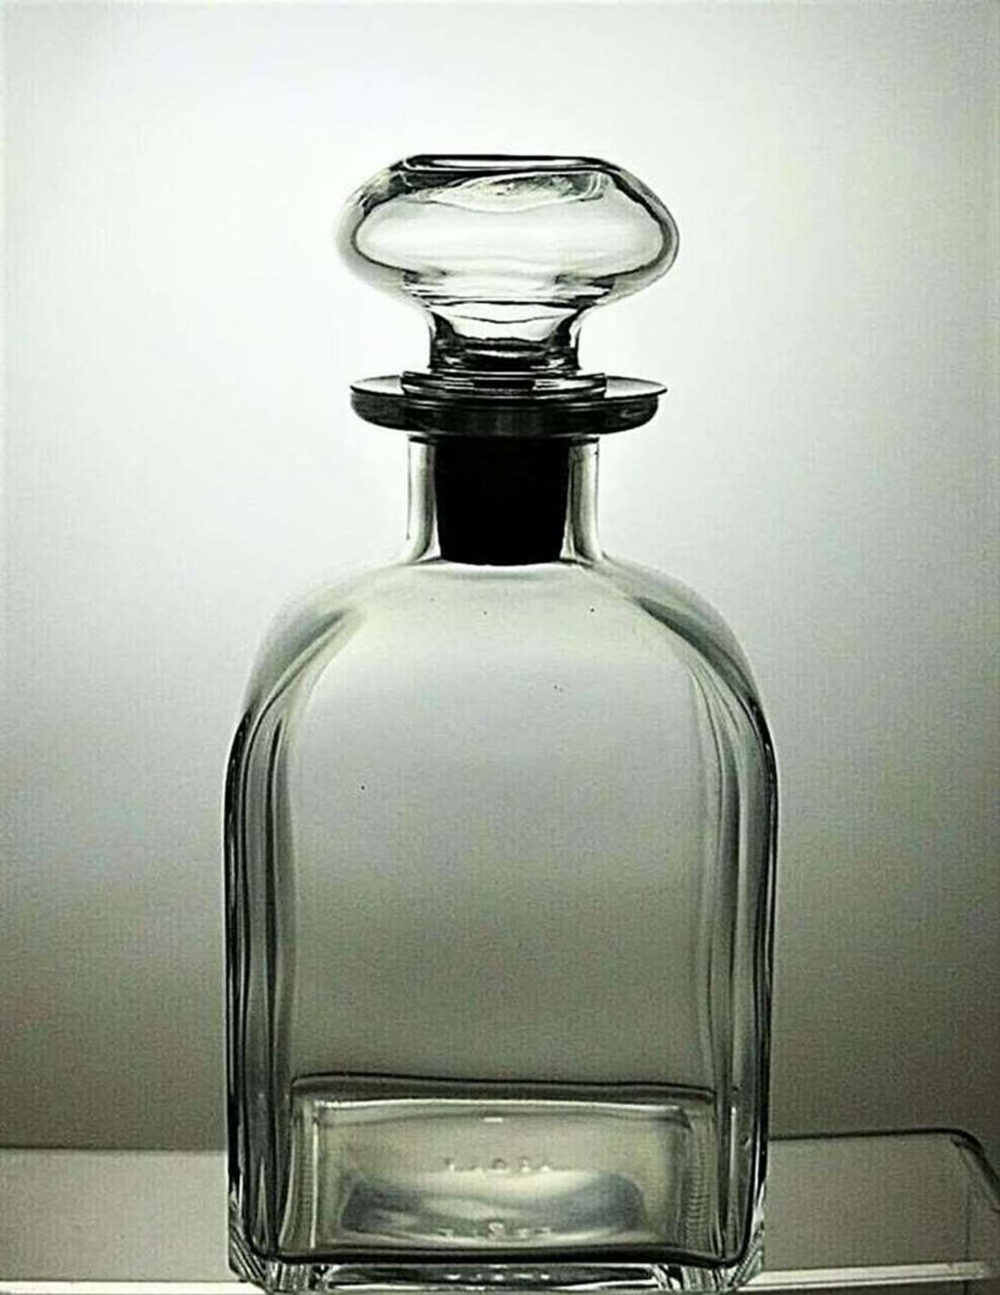 Italian Made Mid Century Glass Decanter with Cork Stopper - Image 4 of 4